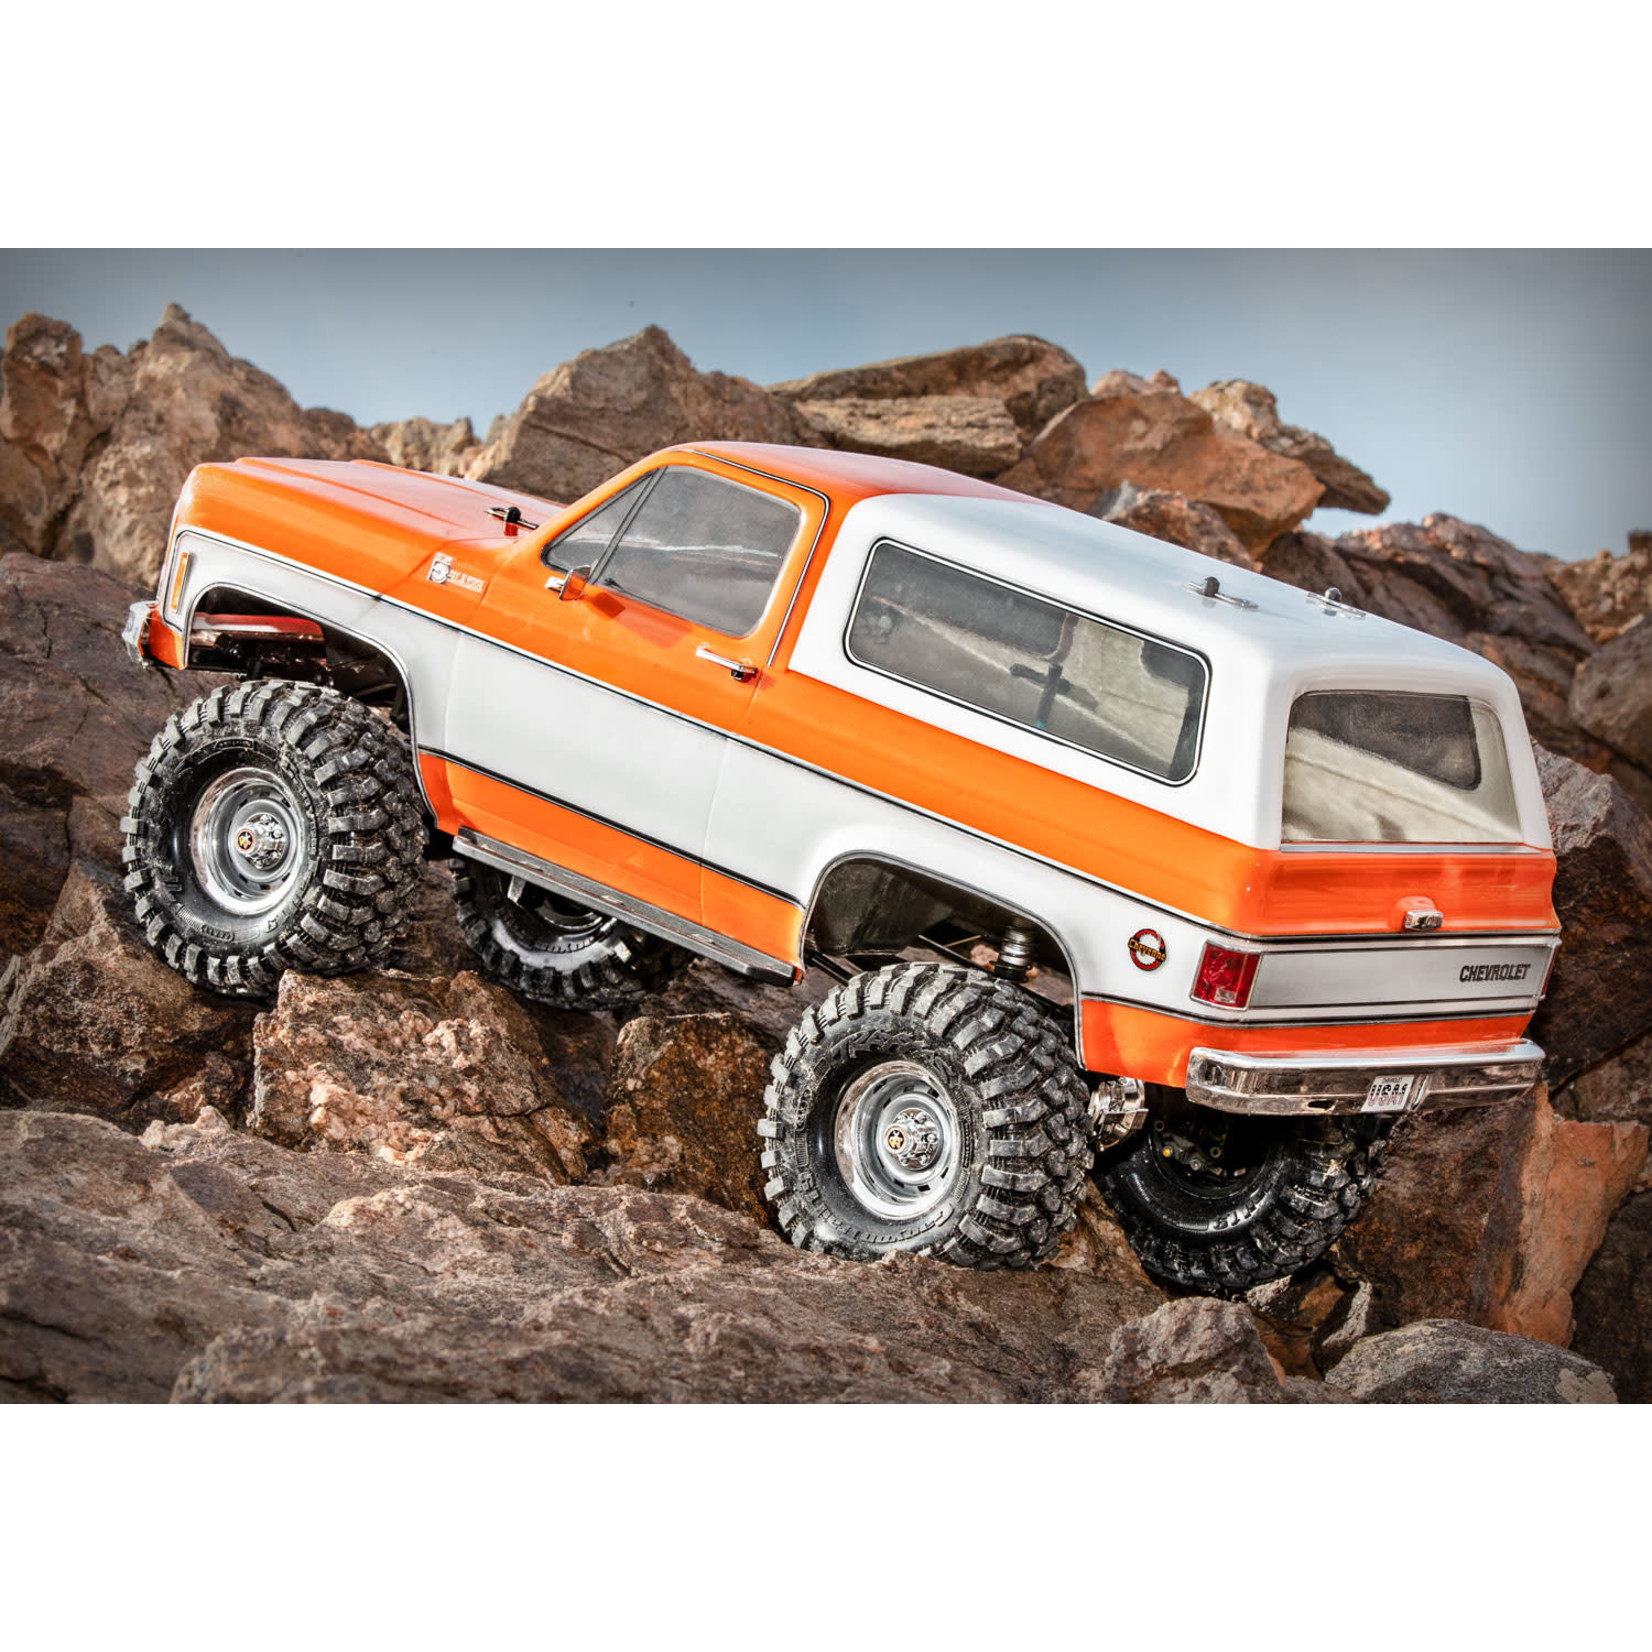 TRAXXAS TRX-4® Scale and Trail™ Crawler with 1979 Chevrolet Blazer Body:  4WD Electric Truck with TQi Traxxas Link™ Enabled 2.4GHz Radio System